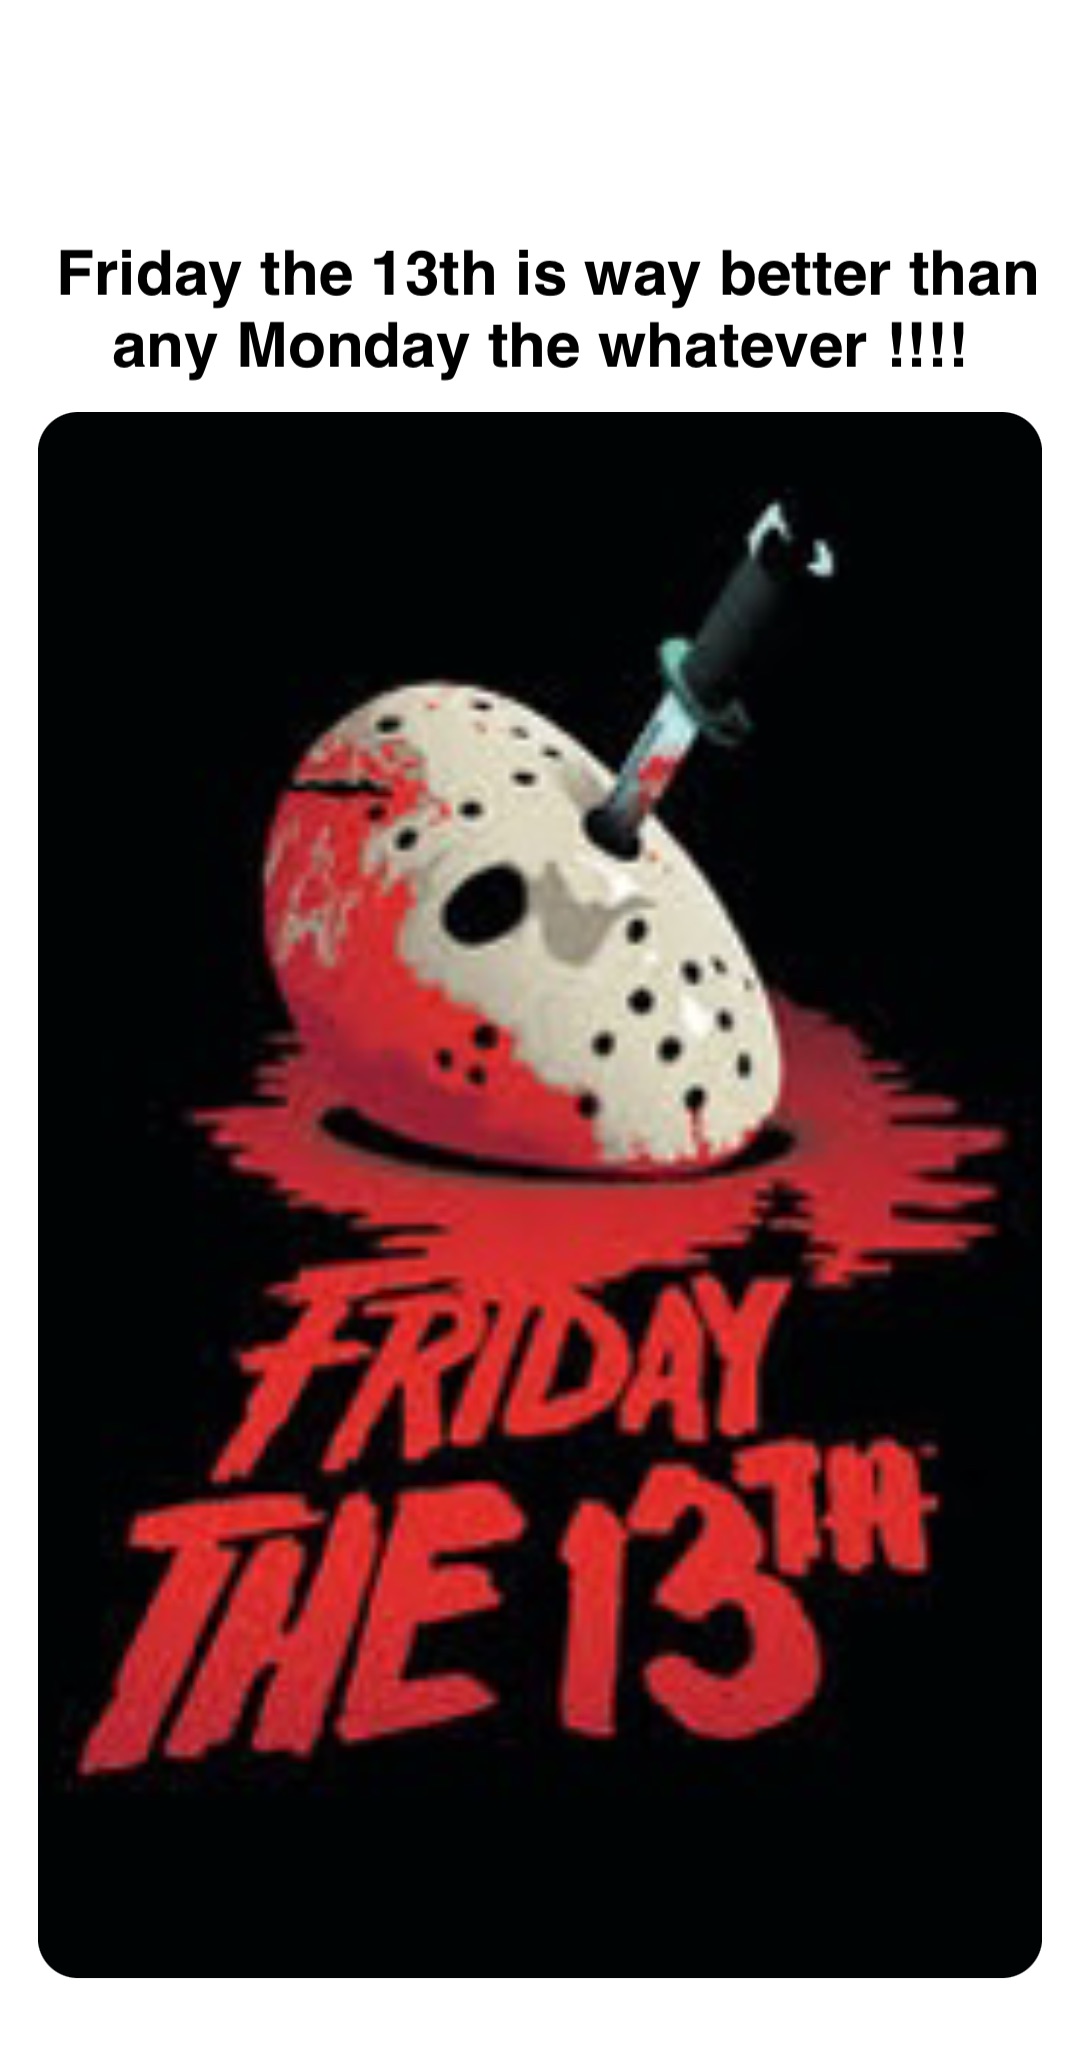 Double tap to edit Friday the 13th is way better than any Monday the whatever !!!!